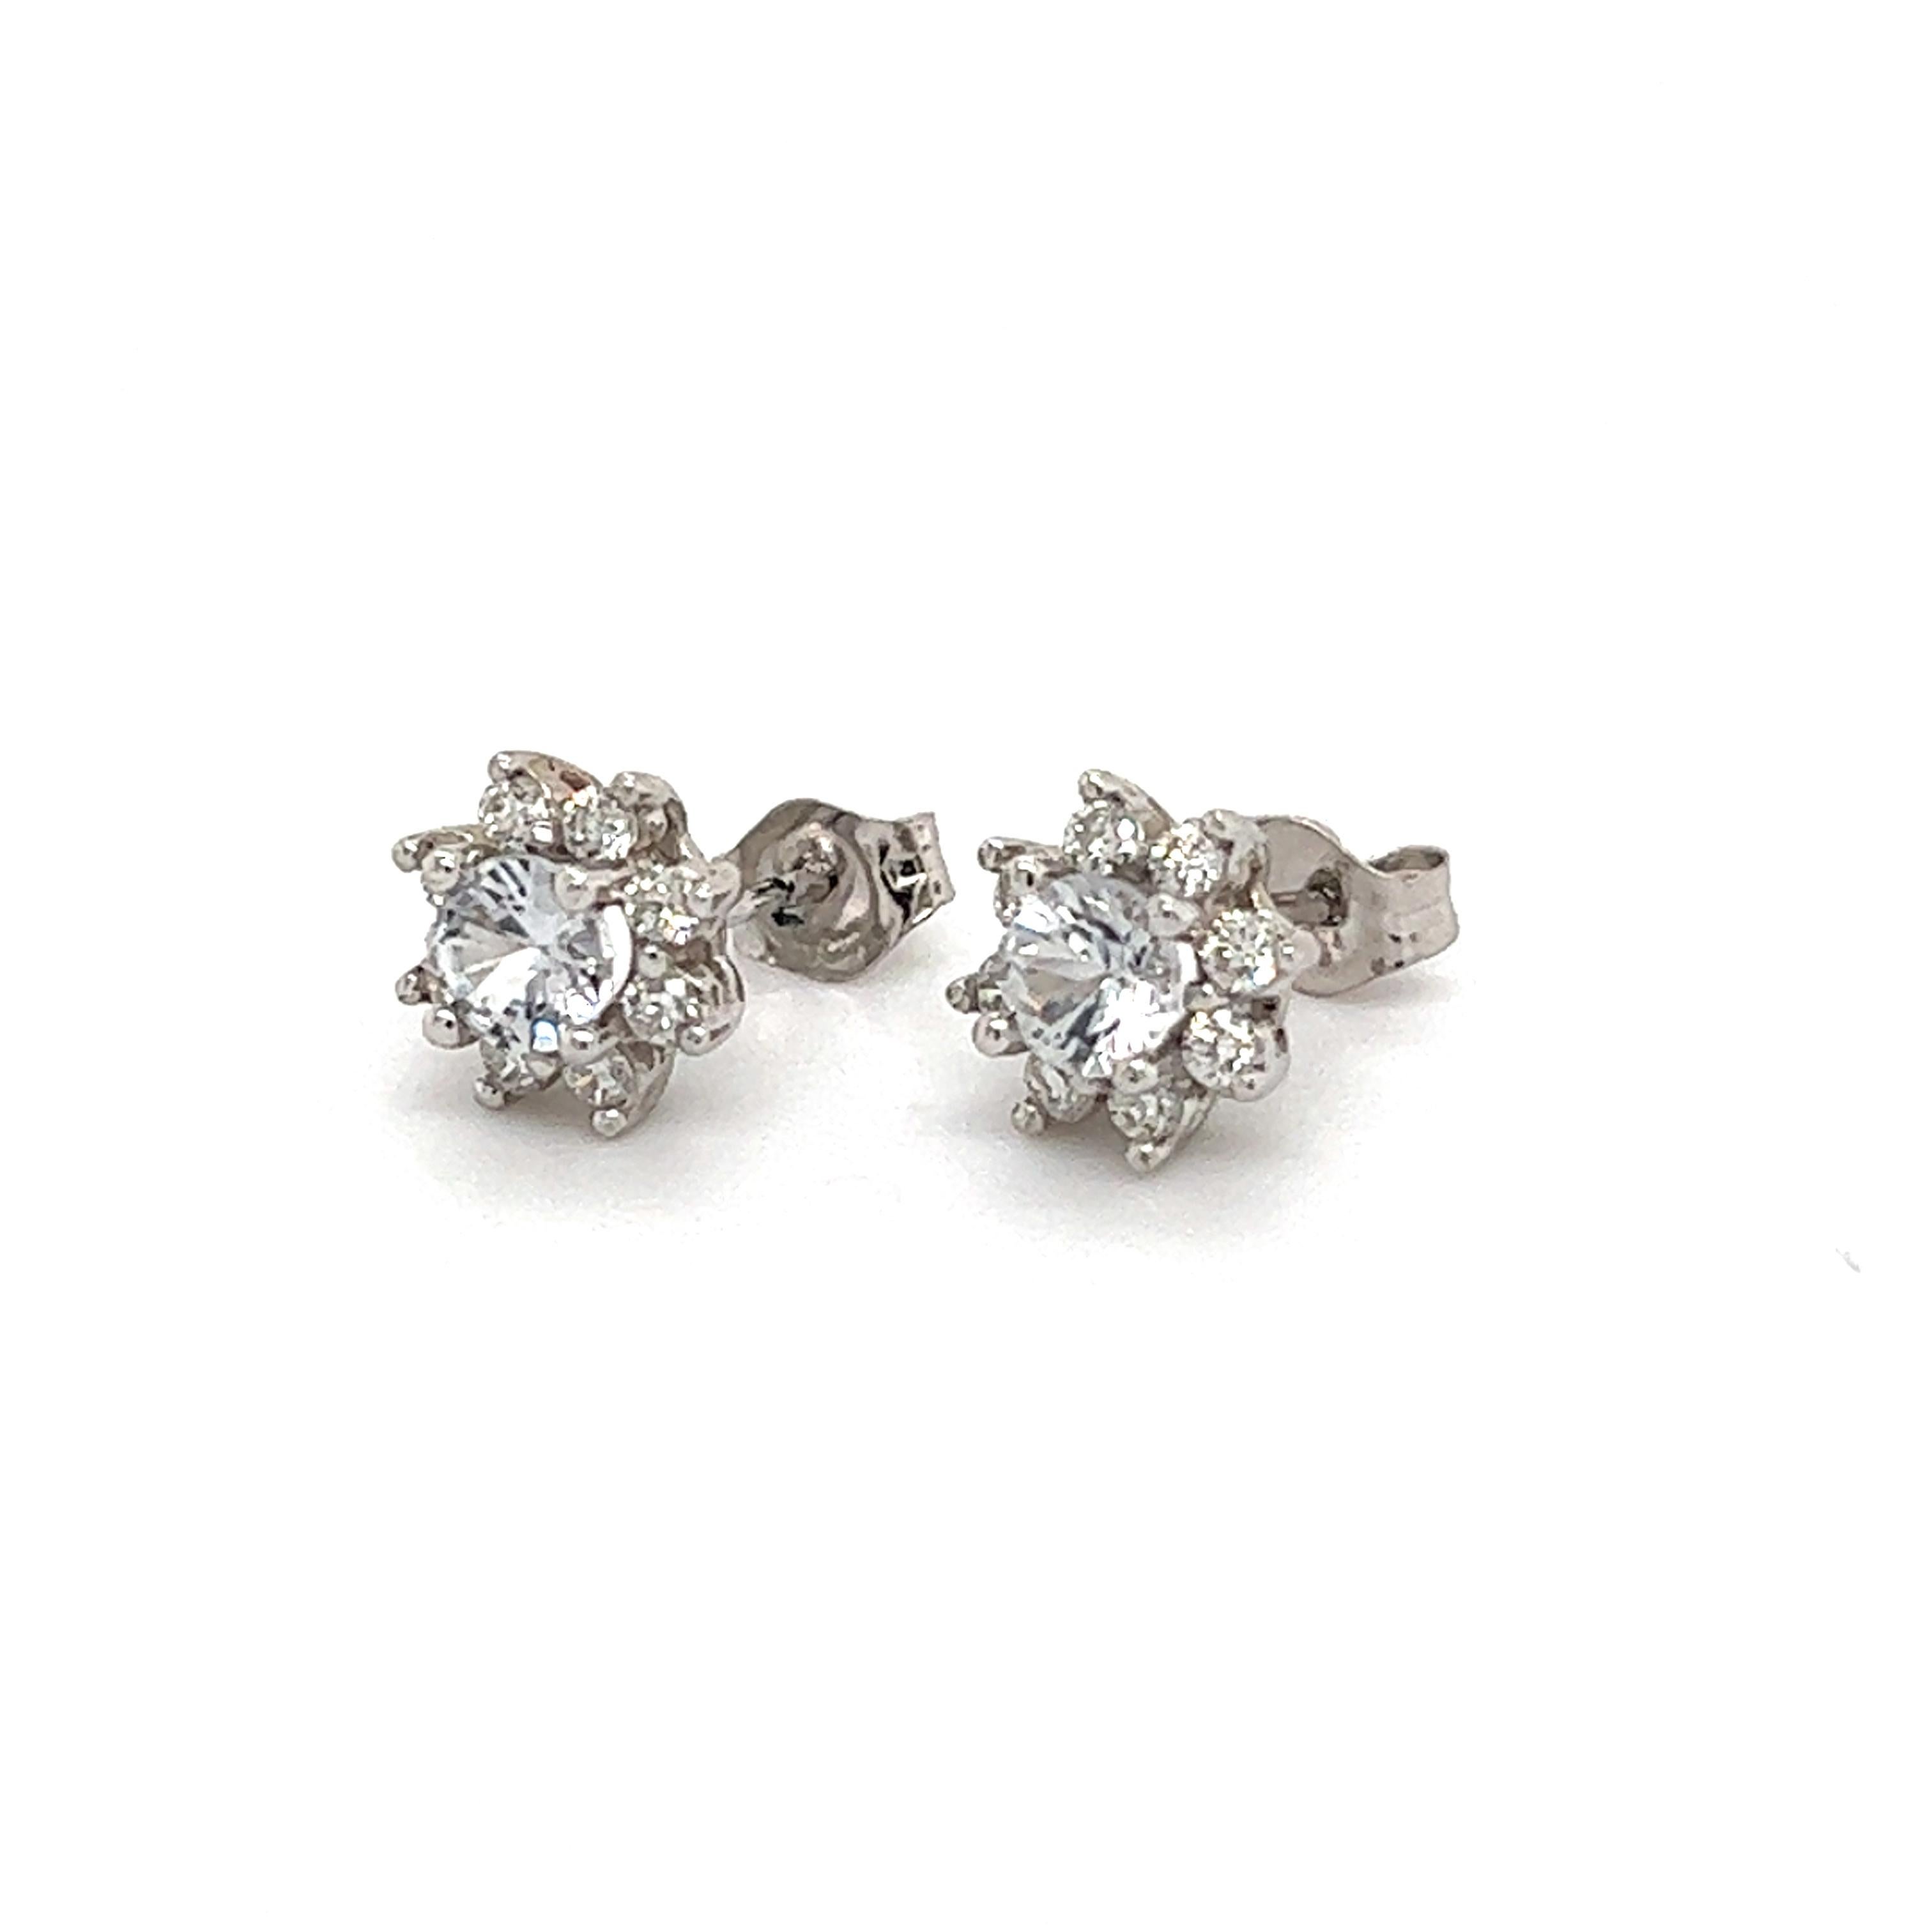 Natural Sapphire Diamond Halo Stud Earrings 14k Gold 1.02 TCW Certified For Sale 1